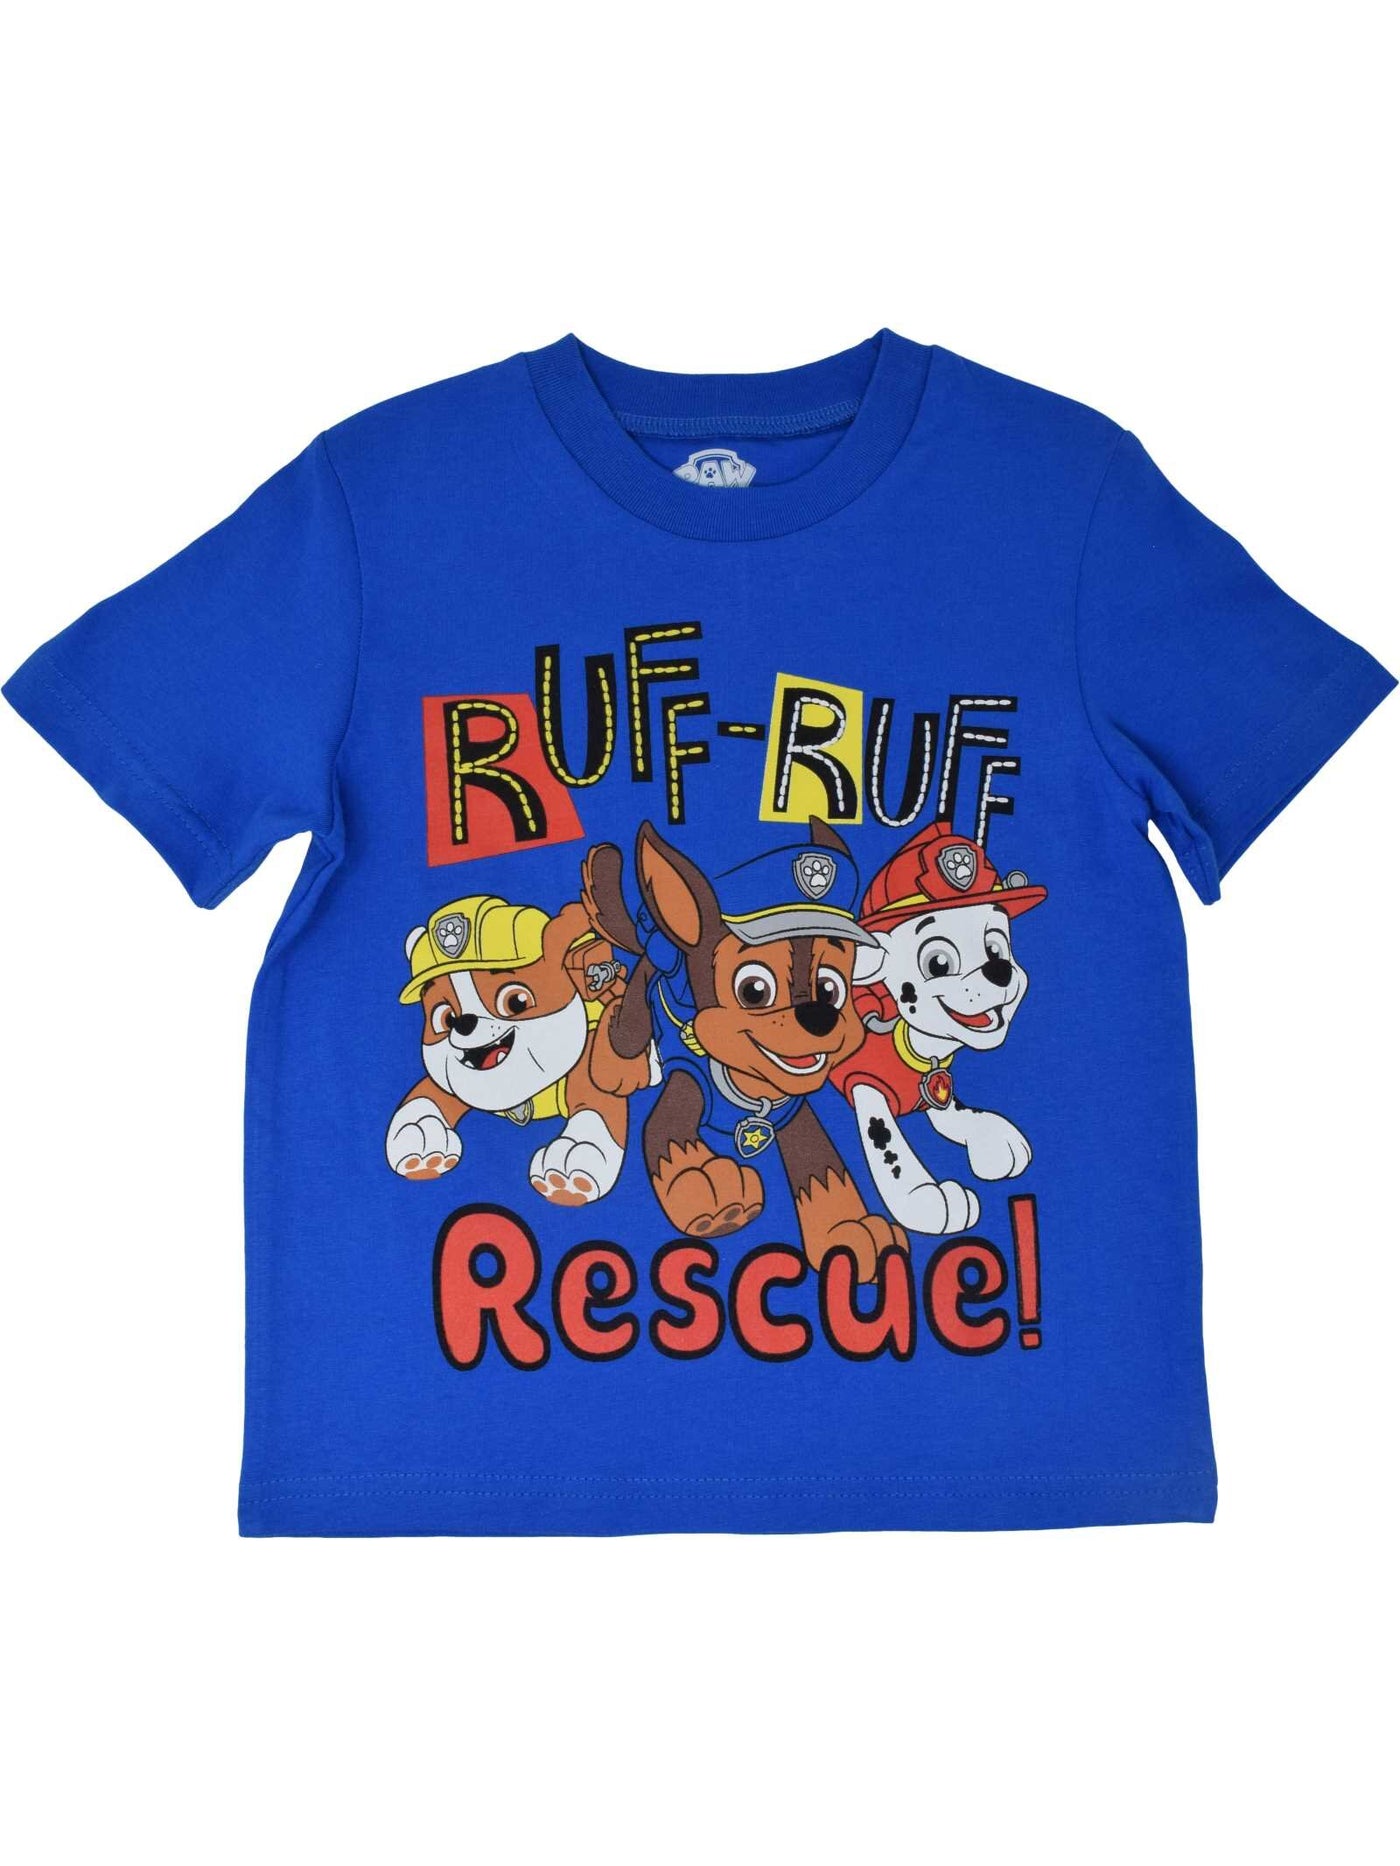 Paw Patrol Chase T-Shirt and Mesh Shorts Outfit Set